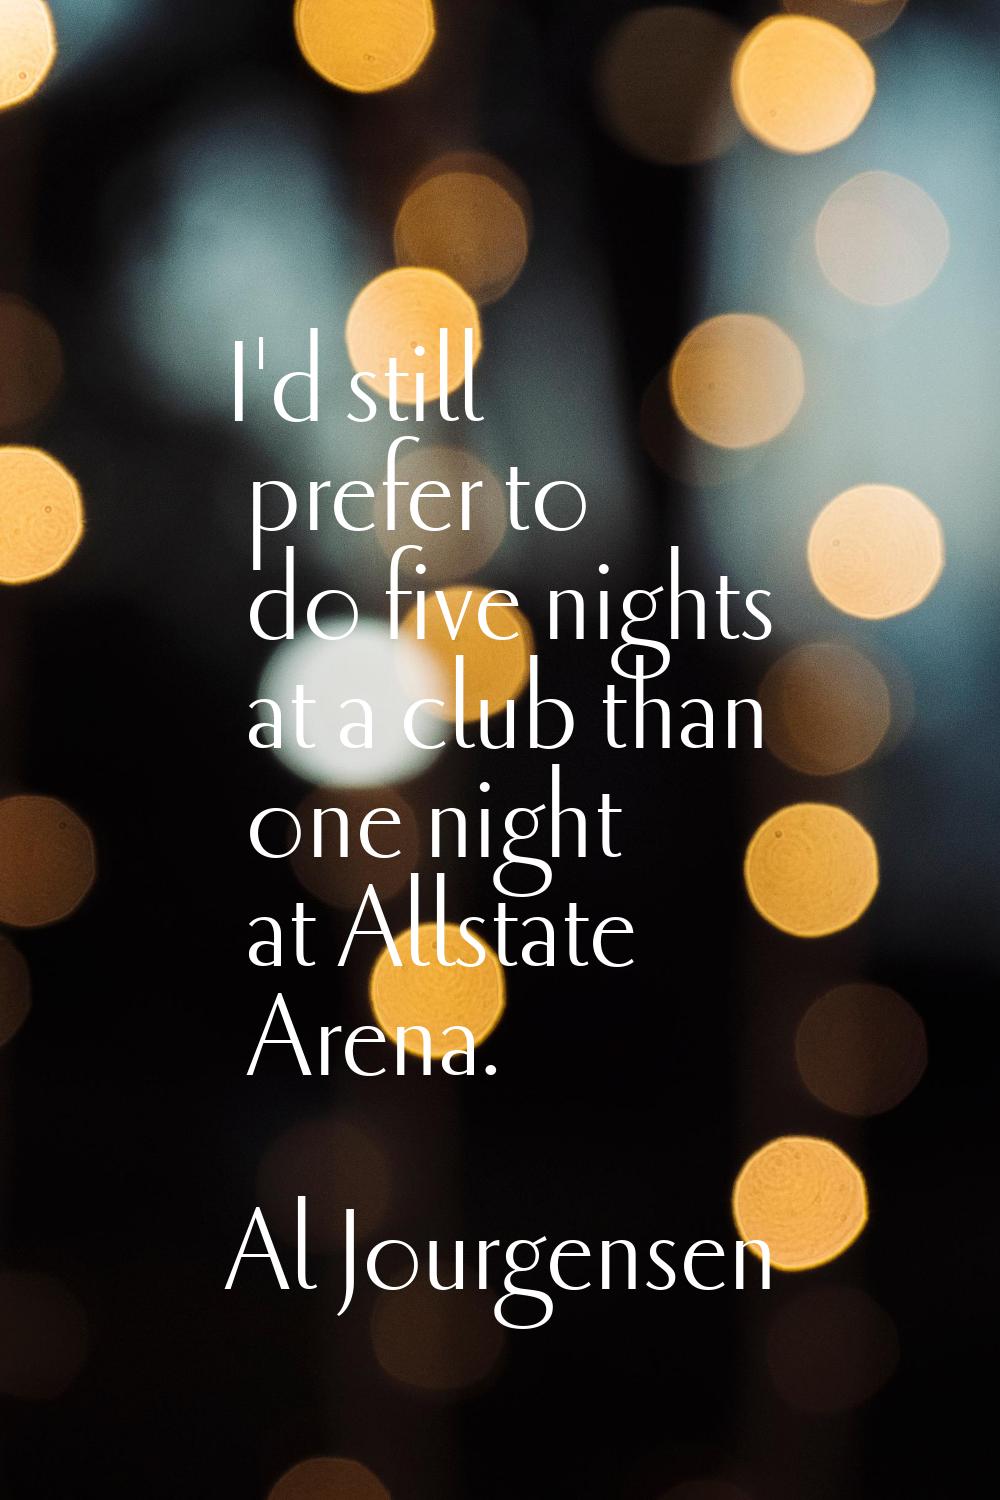 I'd still prefer to do five nights at a club than one night at Allstate Arena.